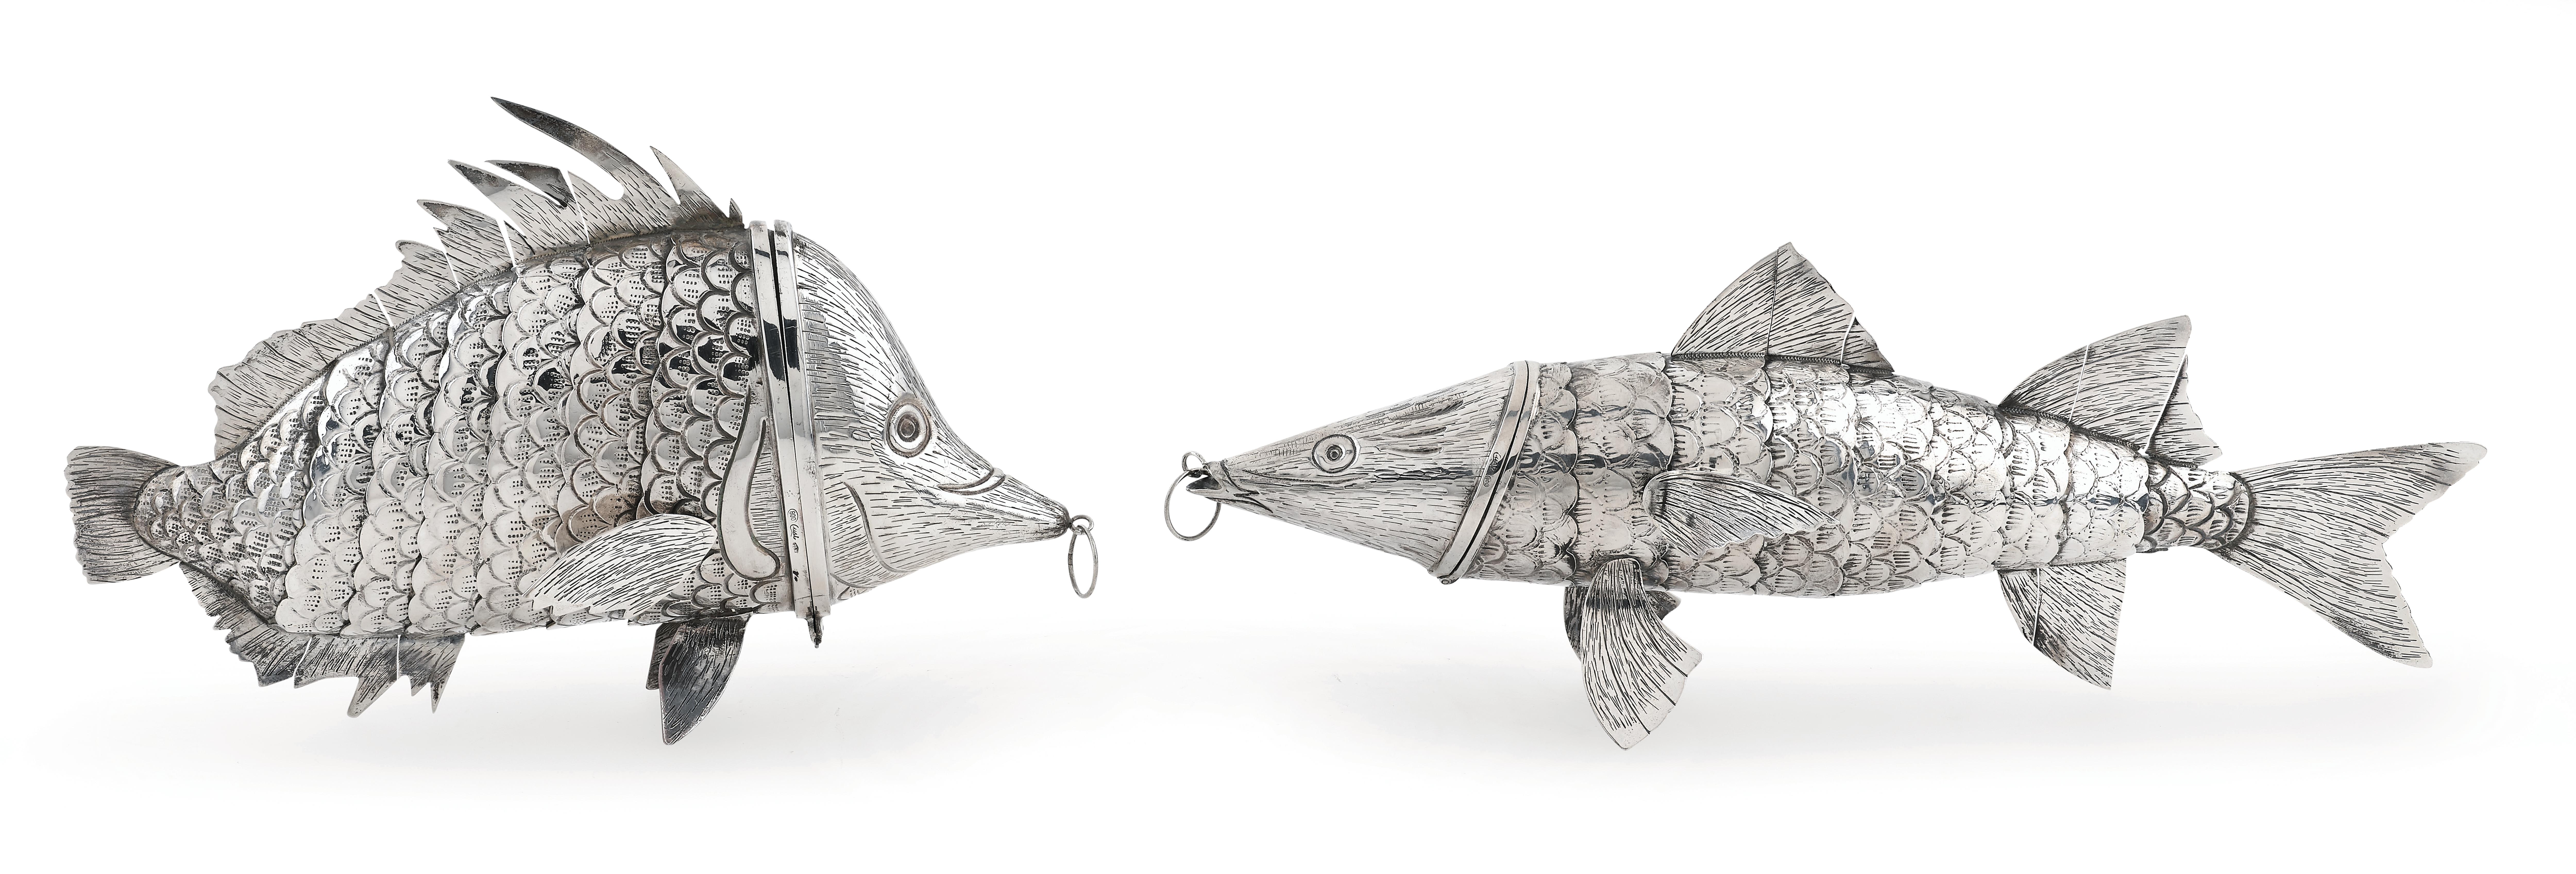 Two Large Fish, - Silver 2023/12/13 - Realized price: EUR 1,820